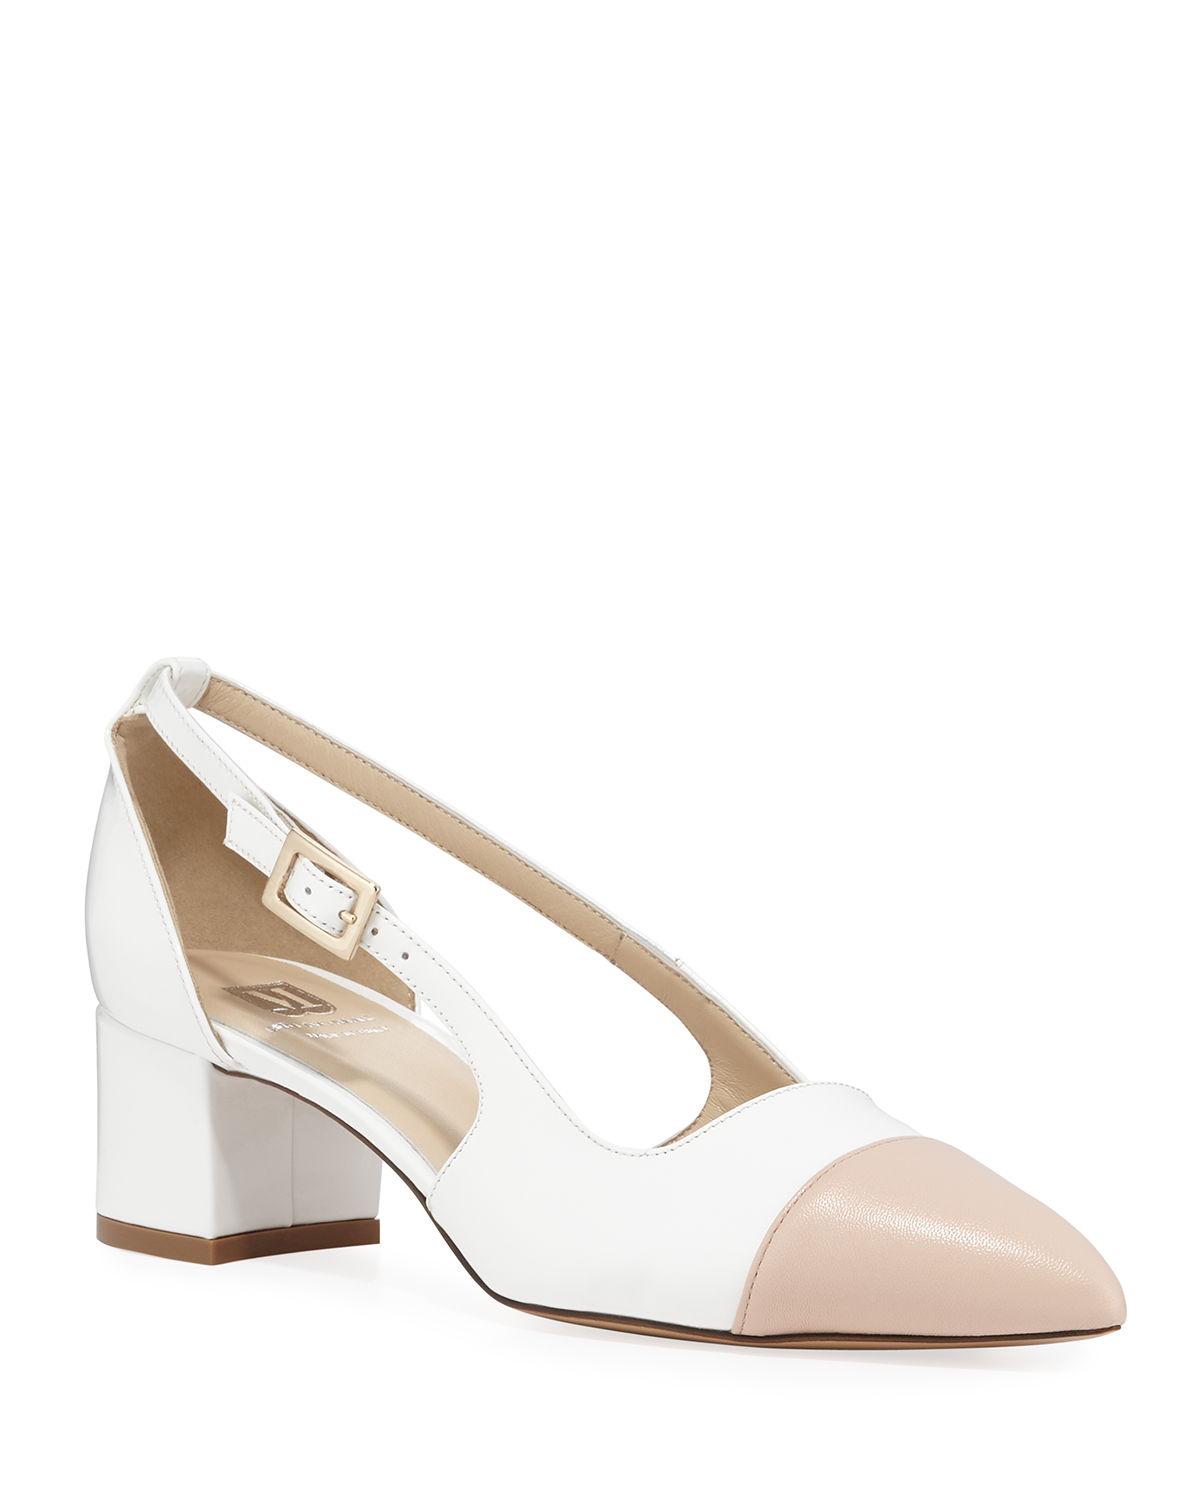 Bruno Magli Lisette Two-tone Leather Slingback Pumps in Natural - Lyst